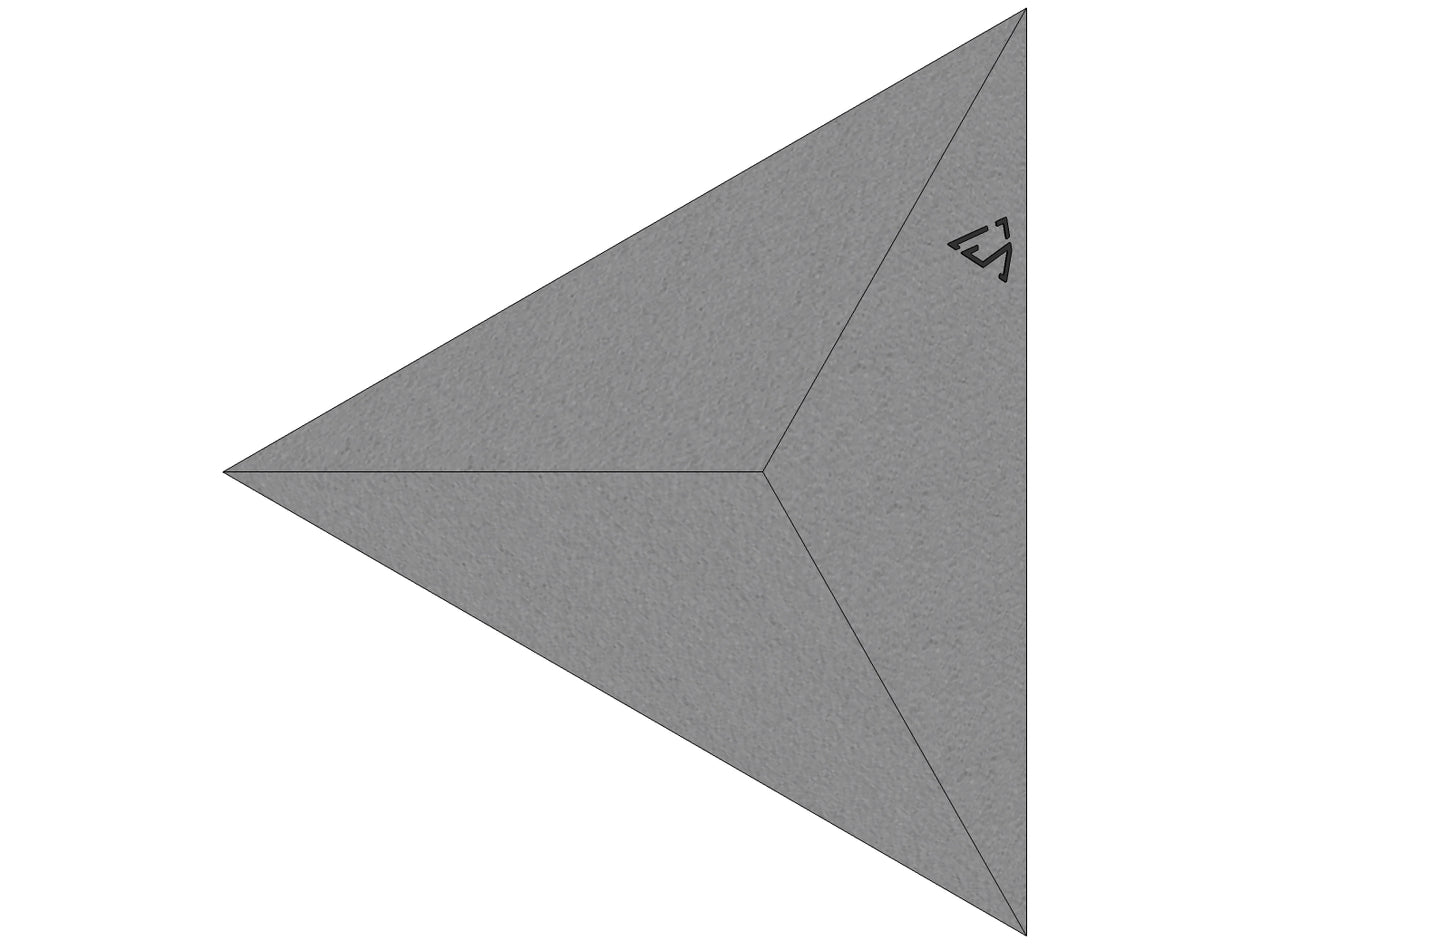 Equilateral Triangle Low